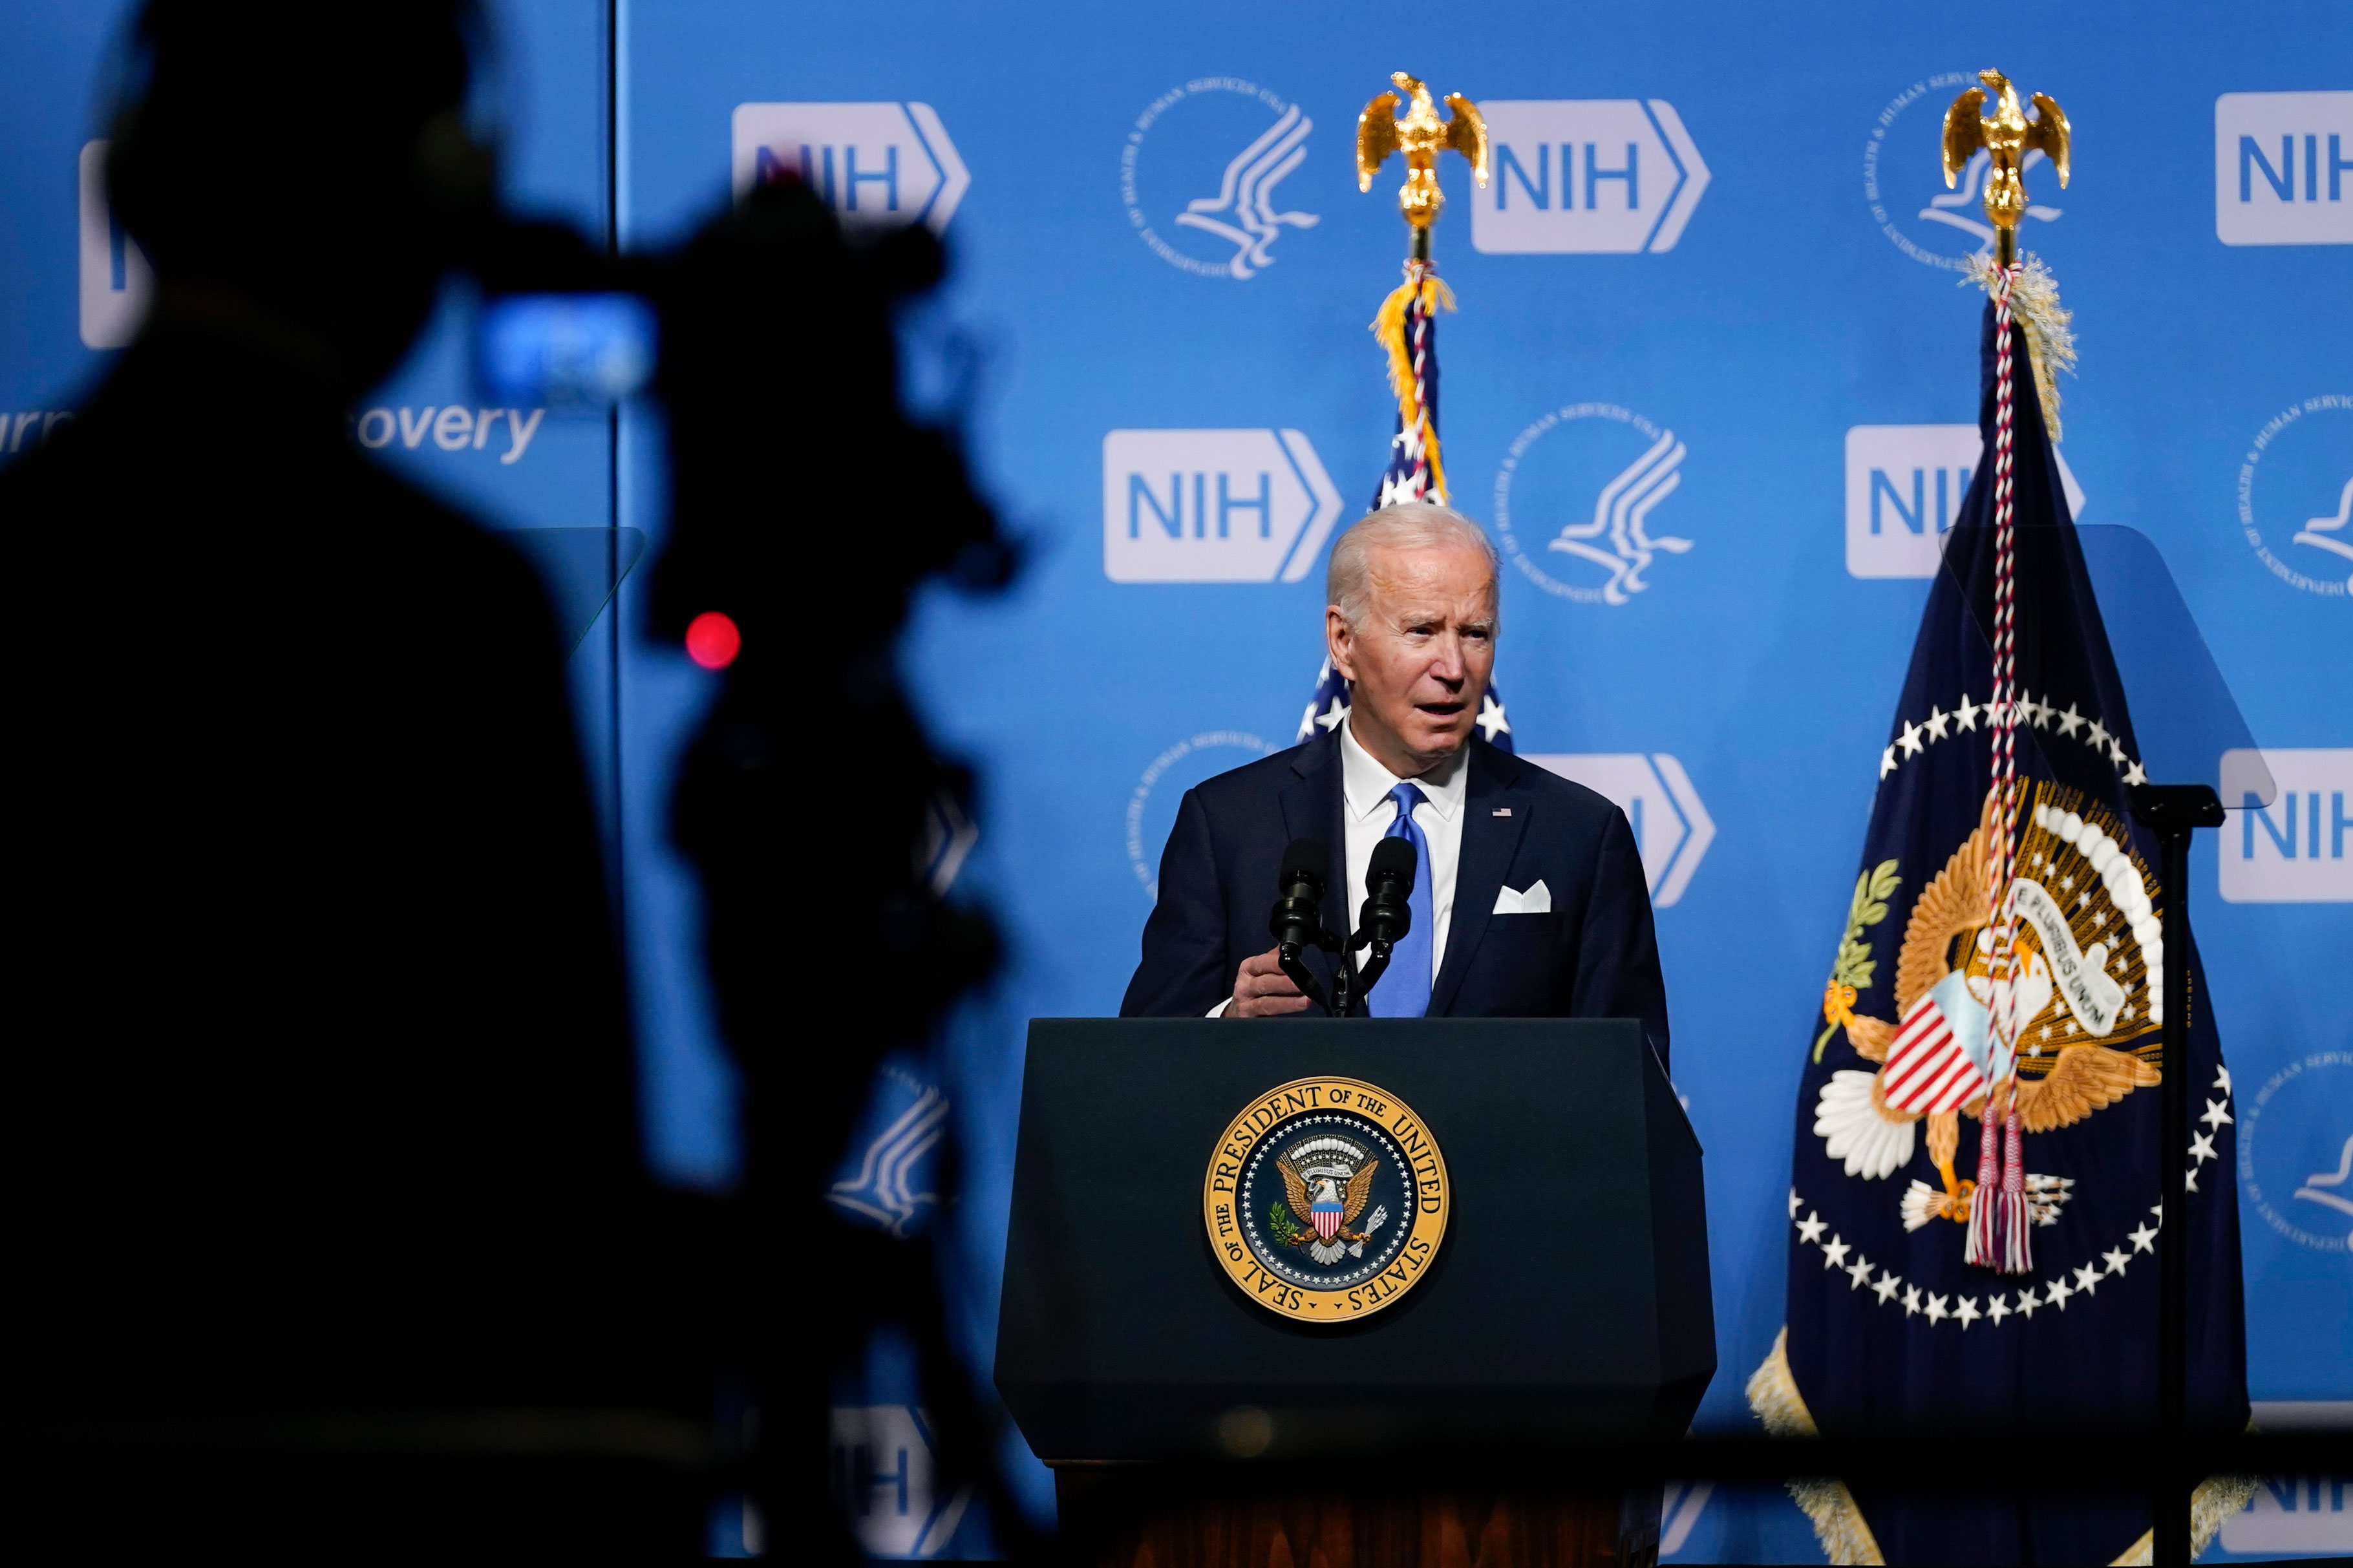 President Joe Biden speaks about the COVID-19 variant called omicron during a visit to the National Institutes of Health, Thursday, December 2, 2021